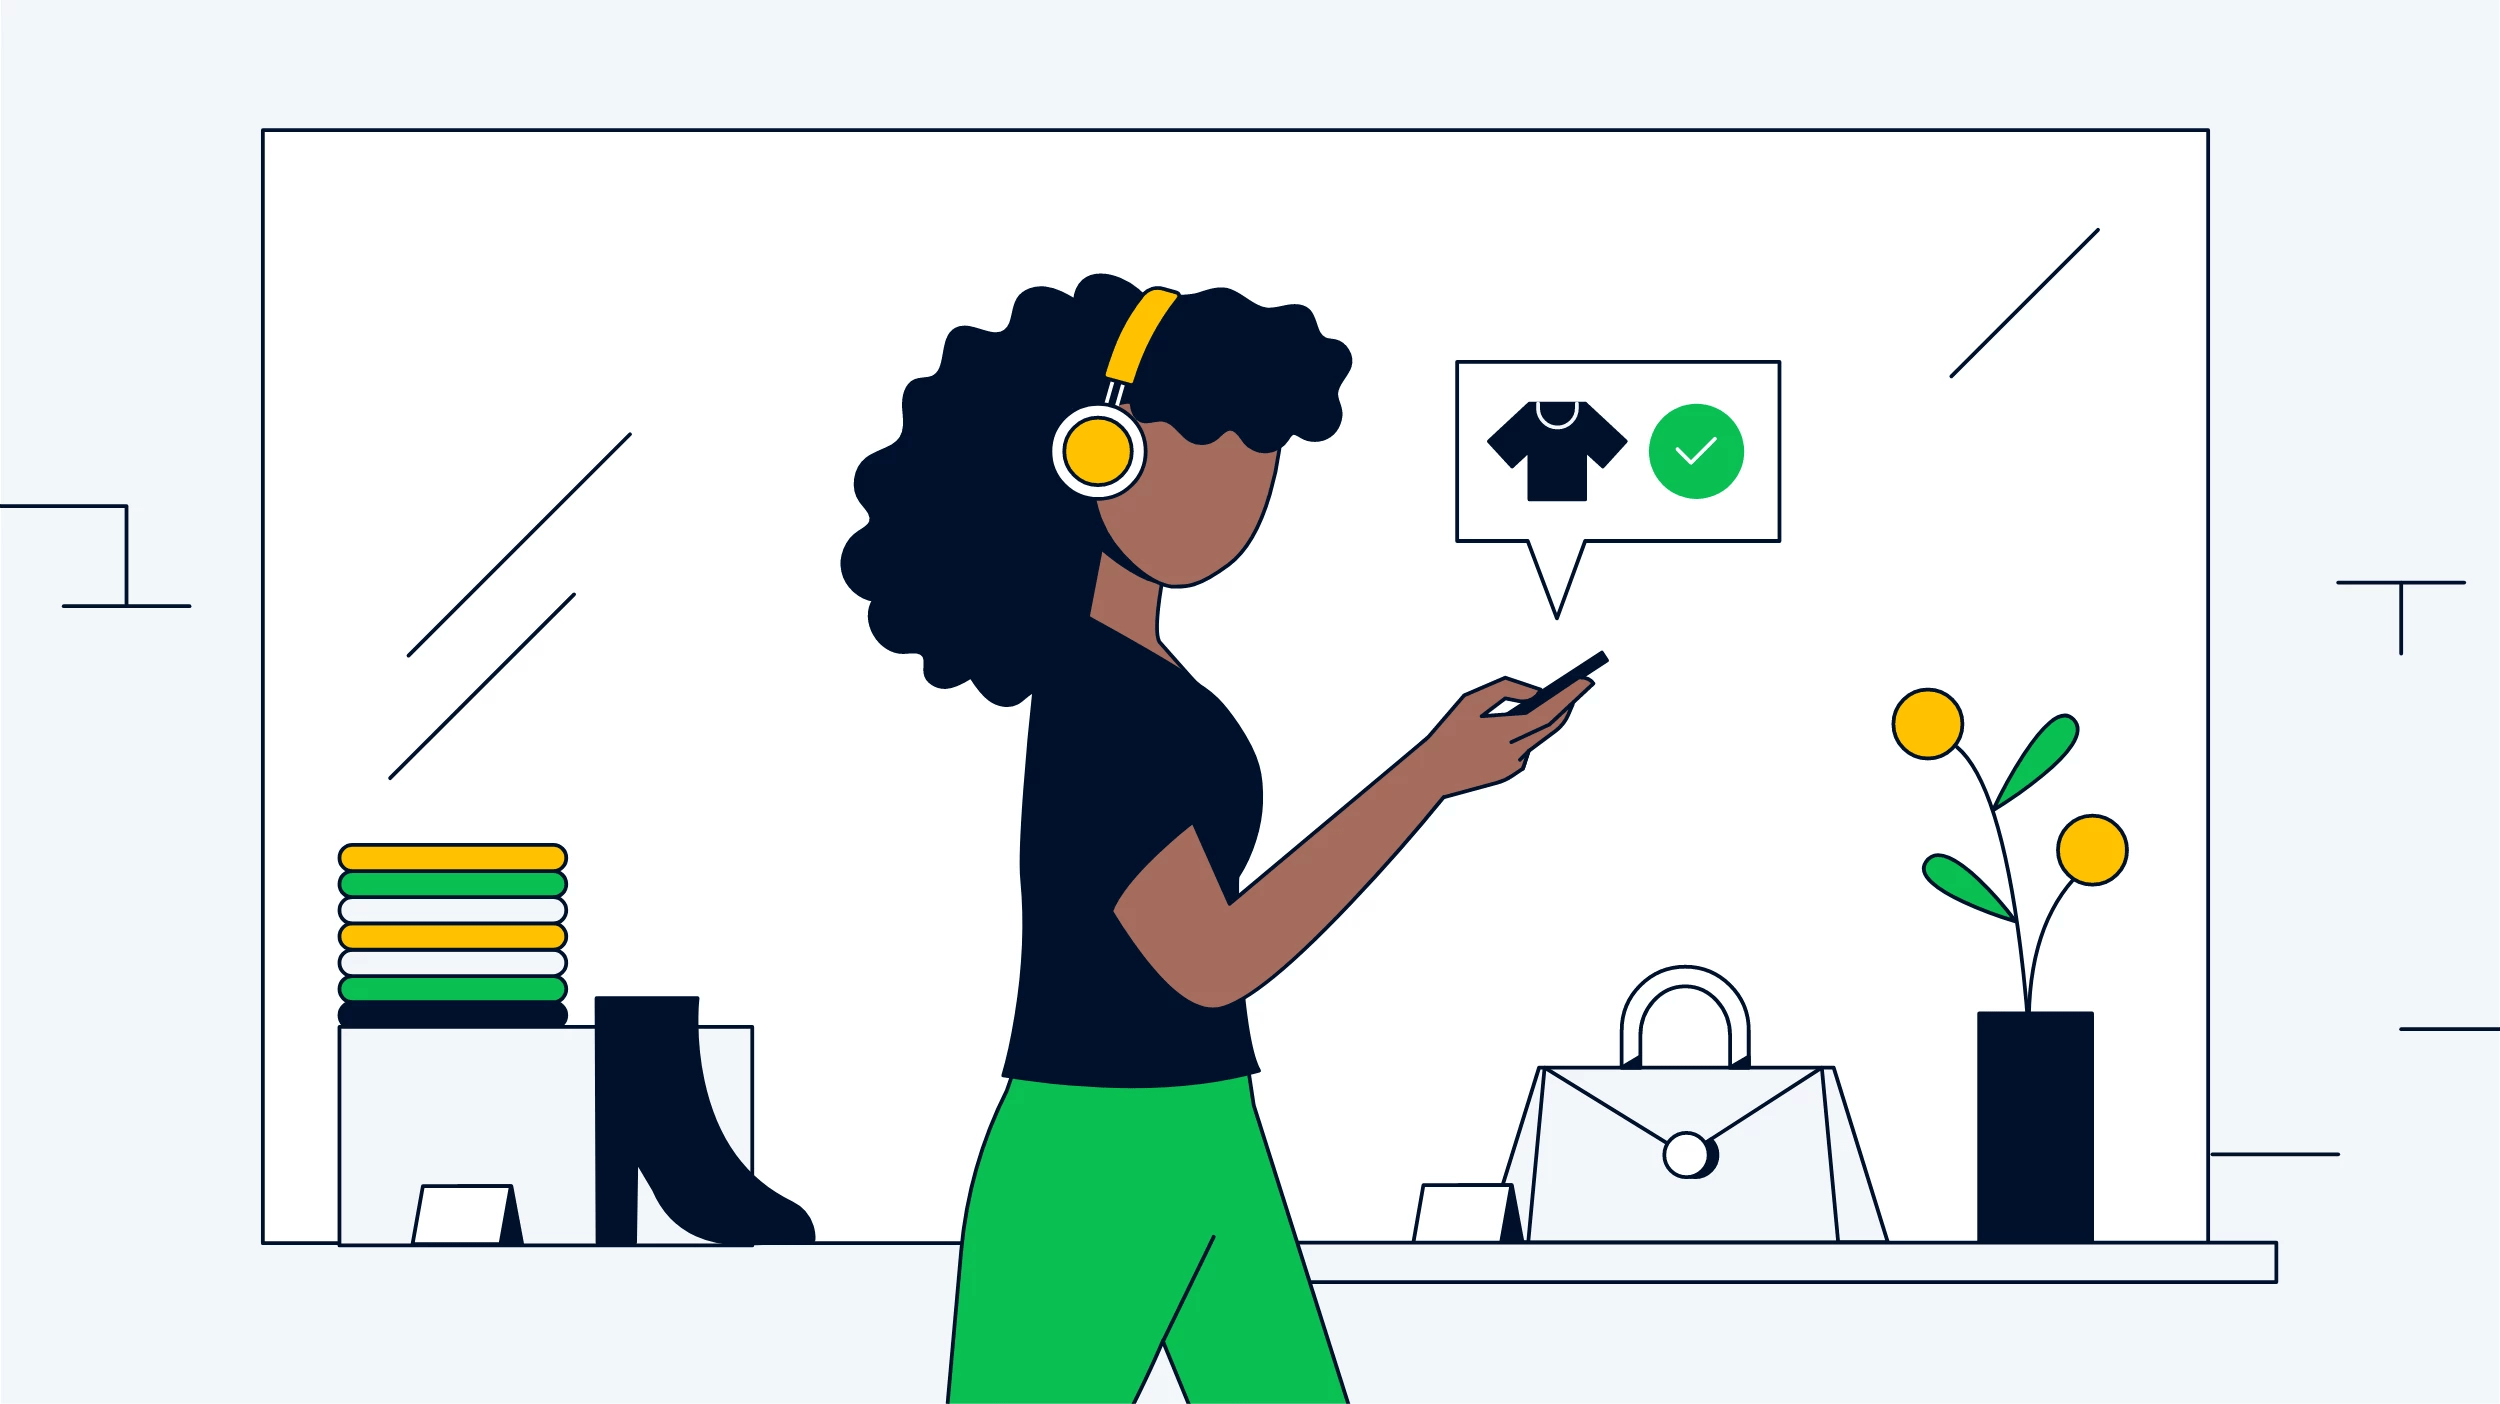 Illustration of person making on purchase on their phone.